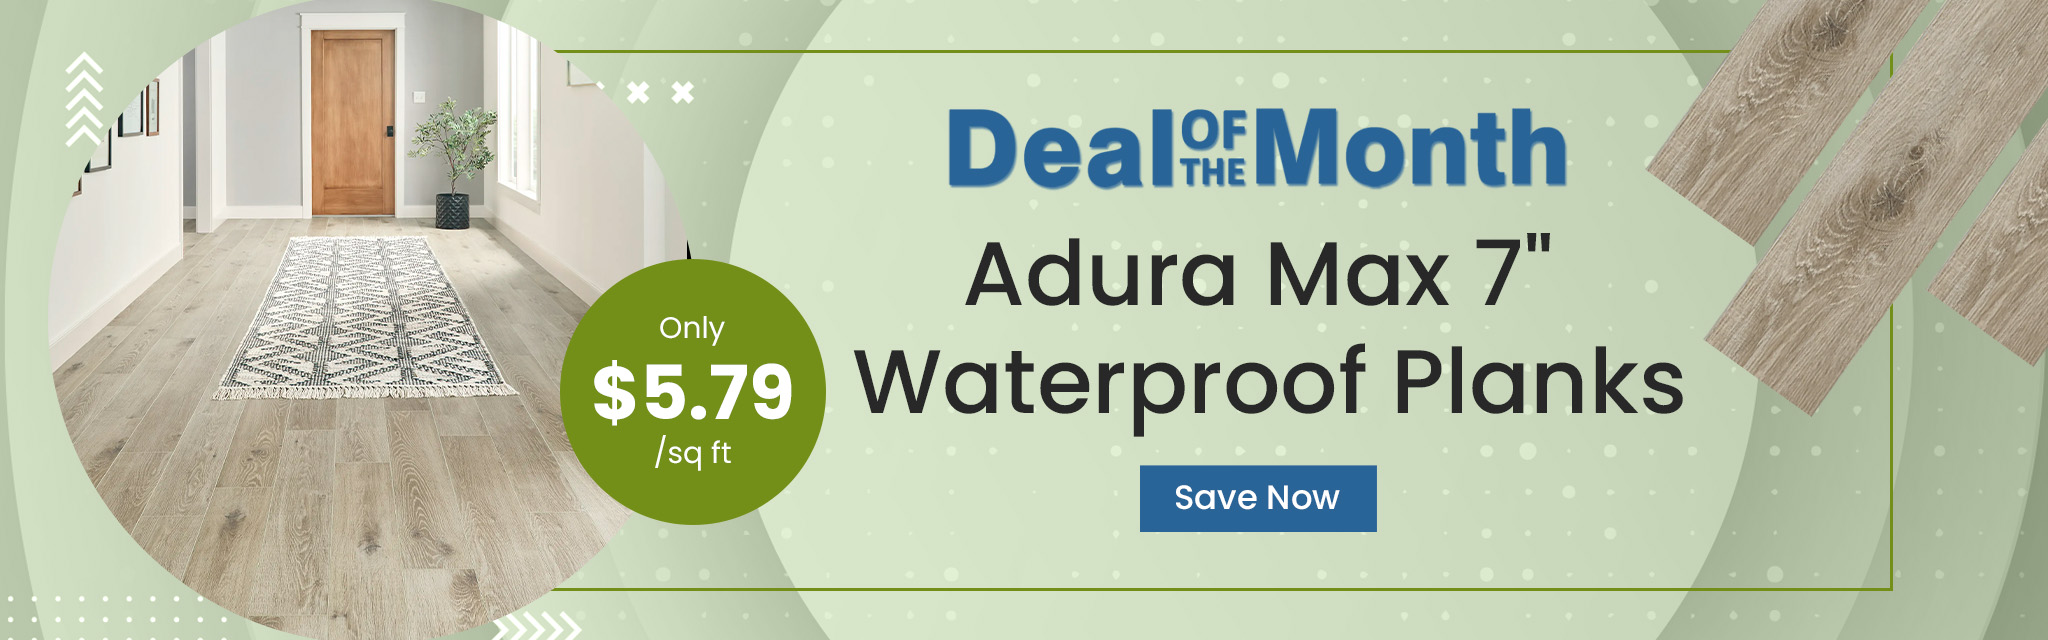 Deal Of The Month. Mannington Adura Max 7" Waterproof Plank. Only $5.79 per square feet. Save Now